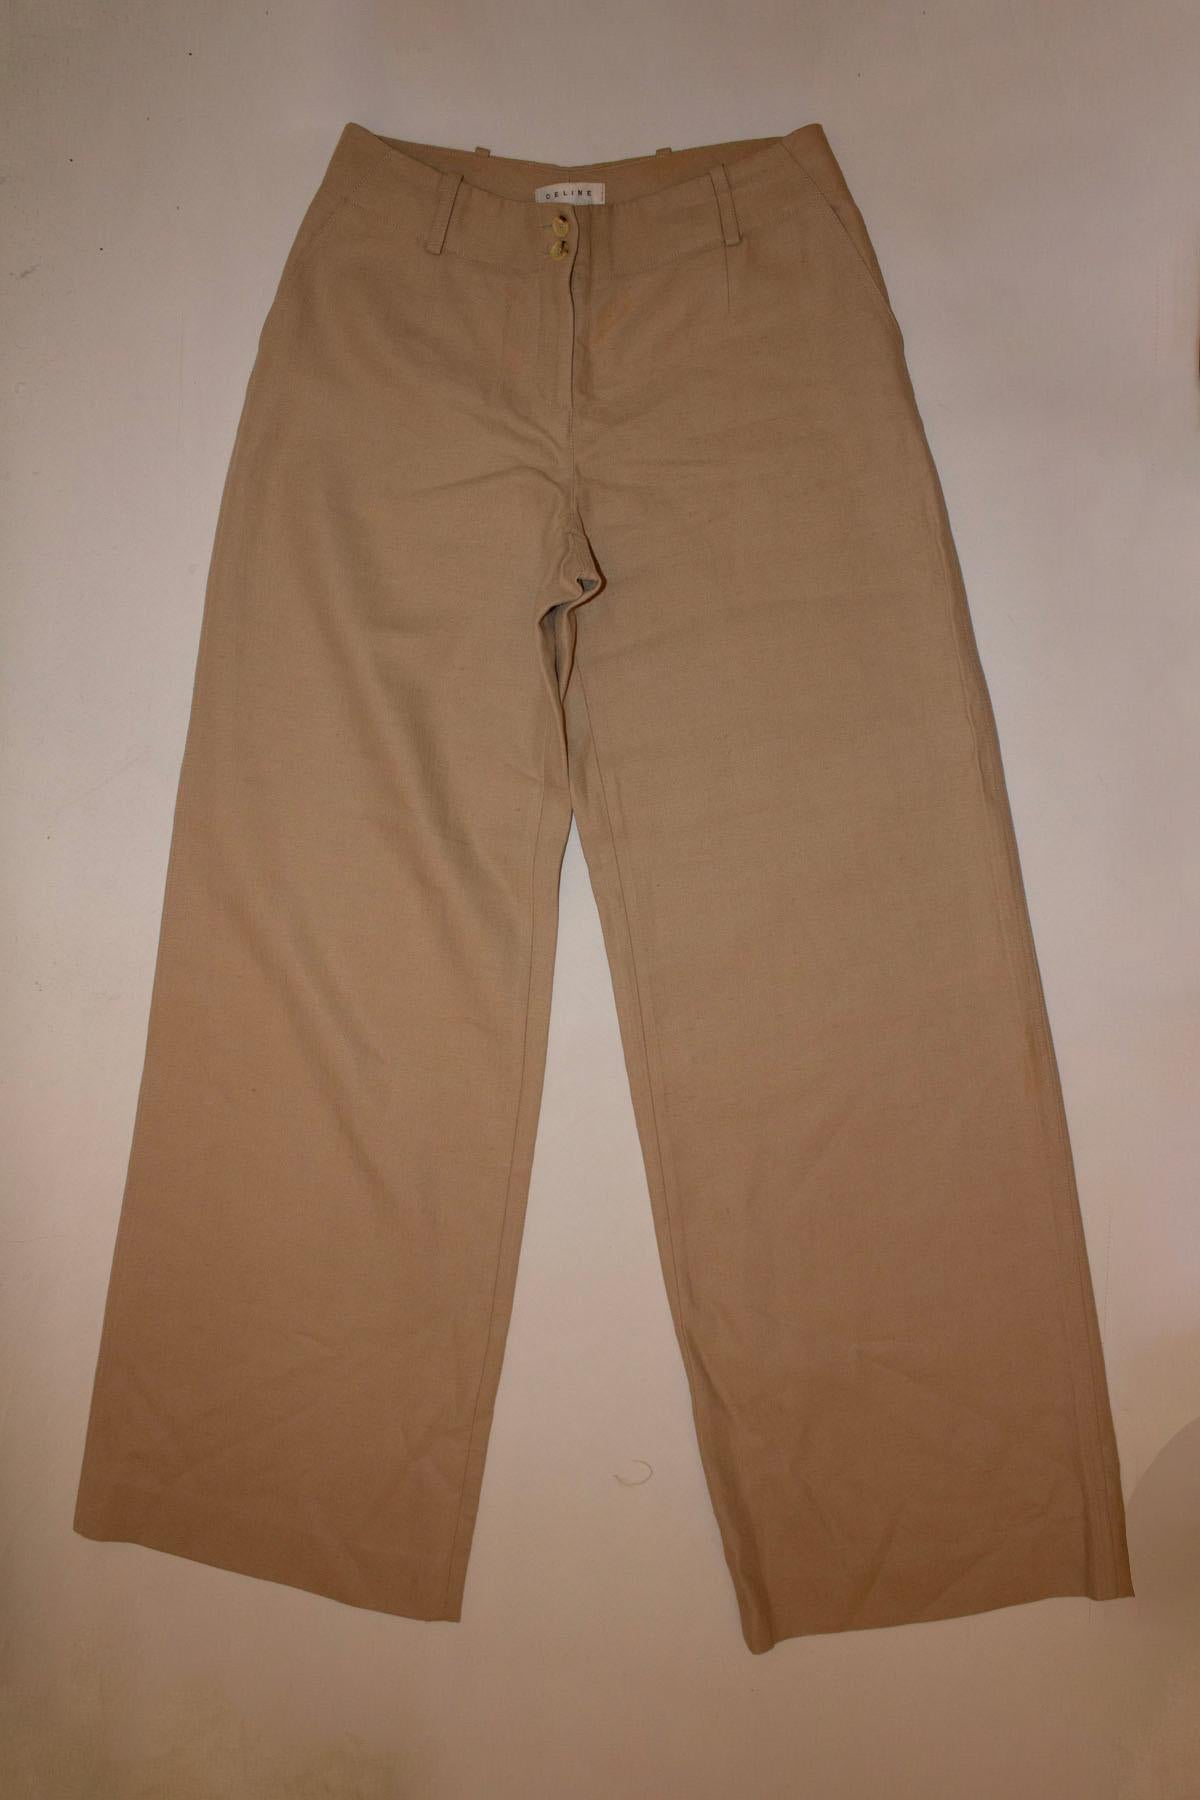 Celine Linen Trousers In Good Condition For Sale In London, GB